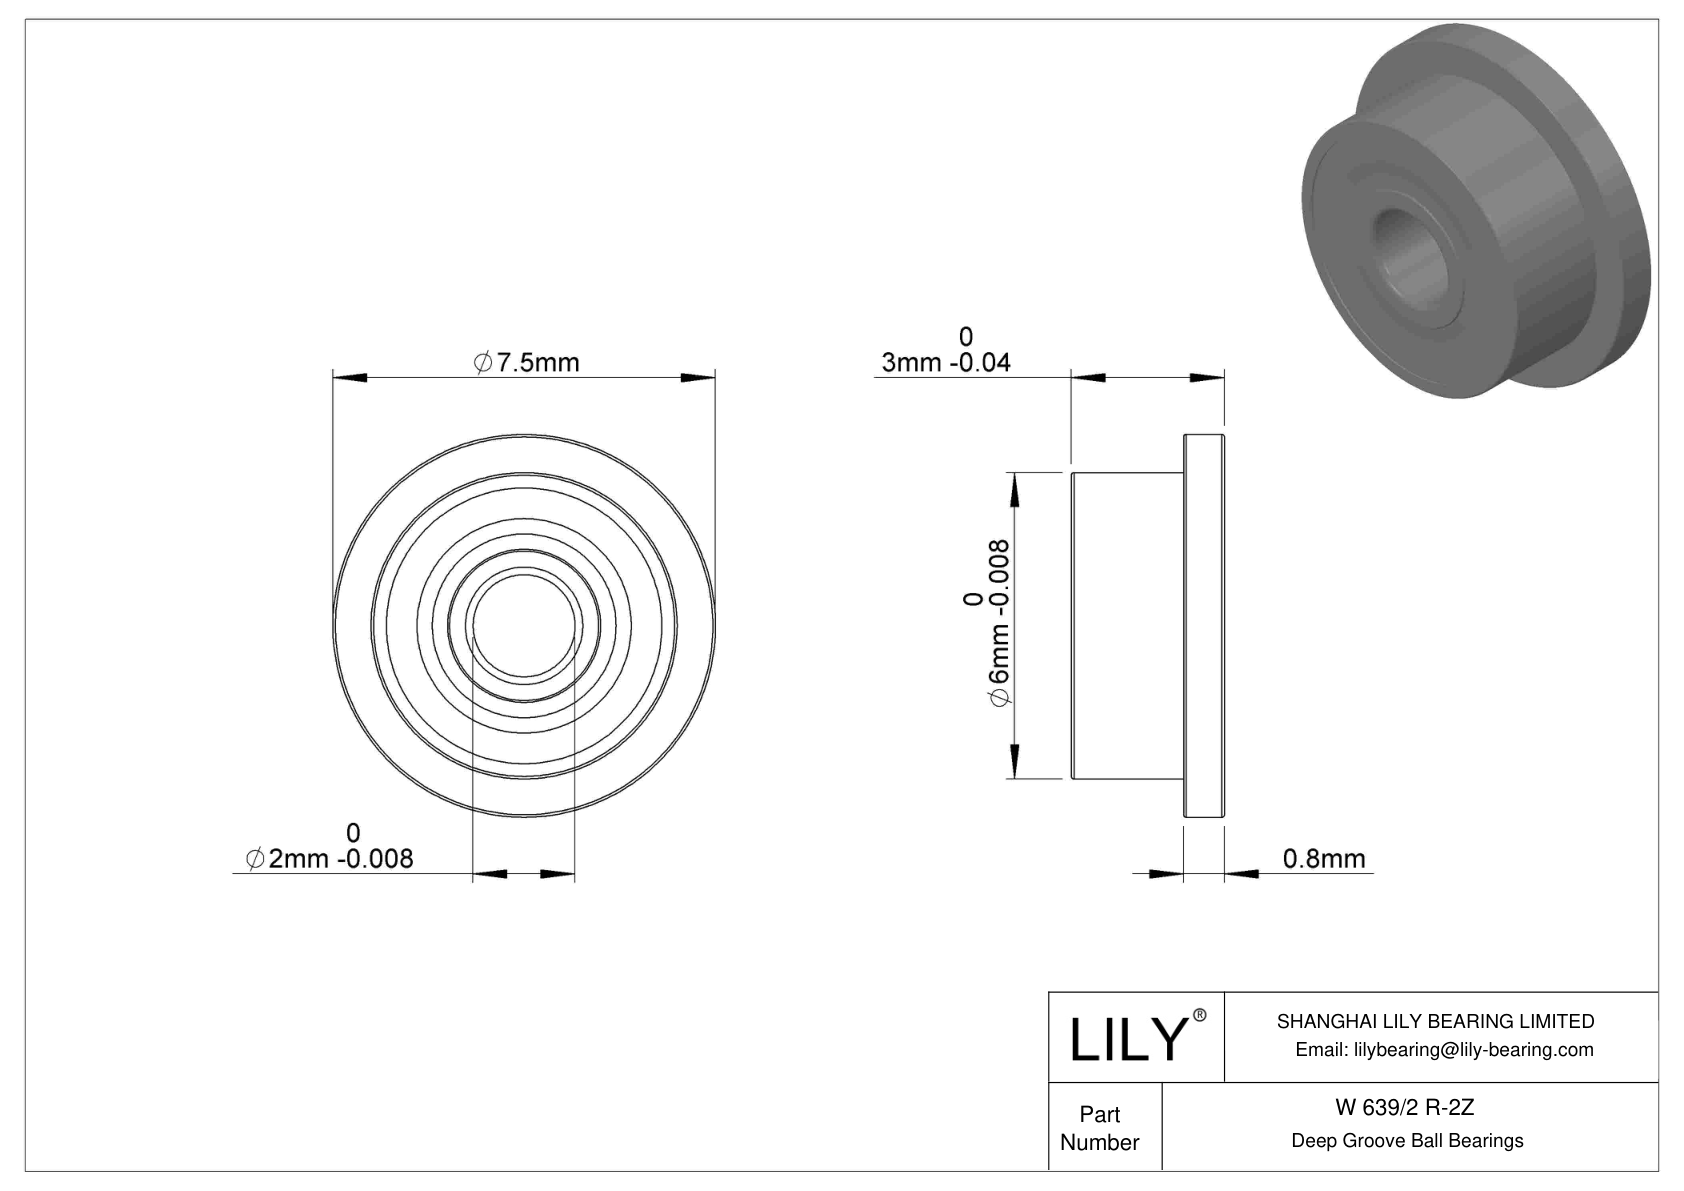 W 639/2 R-2Z Flanged Ball Bearings cad drawing